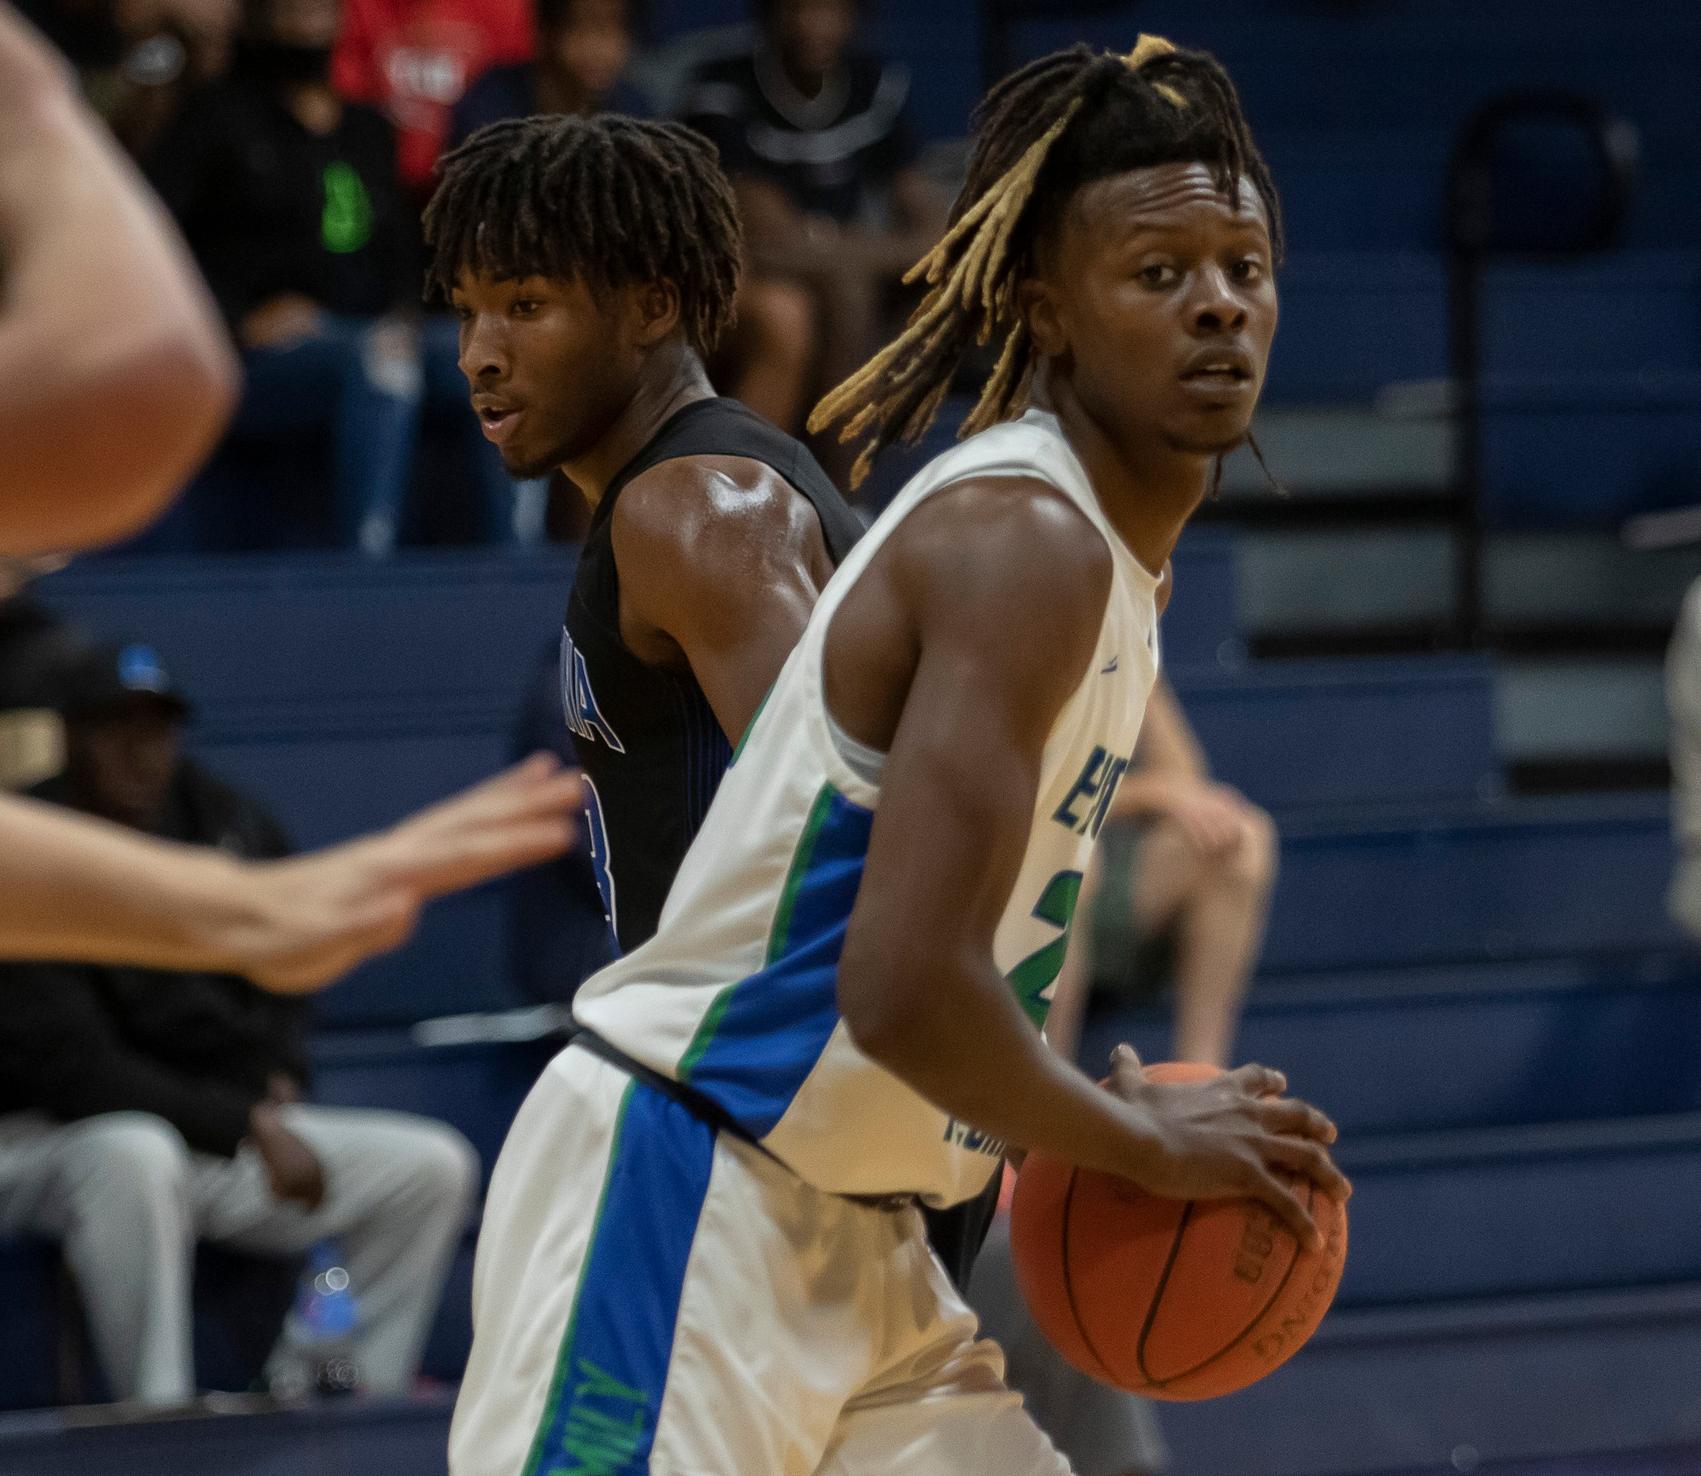 Men's basketball team beats Polk State, is in first place in conference